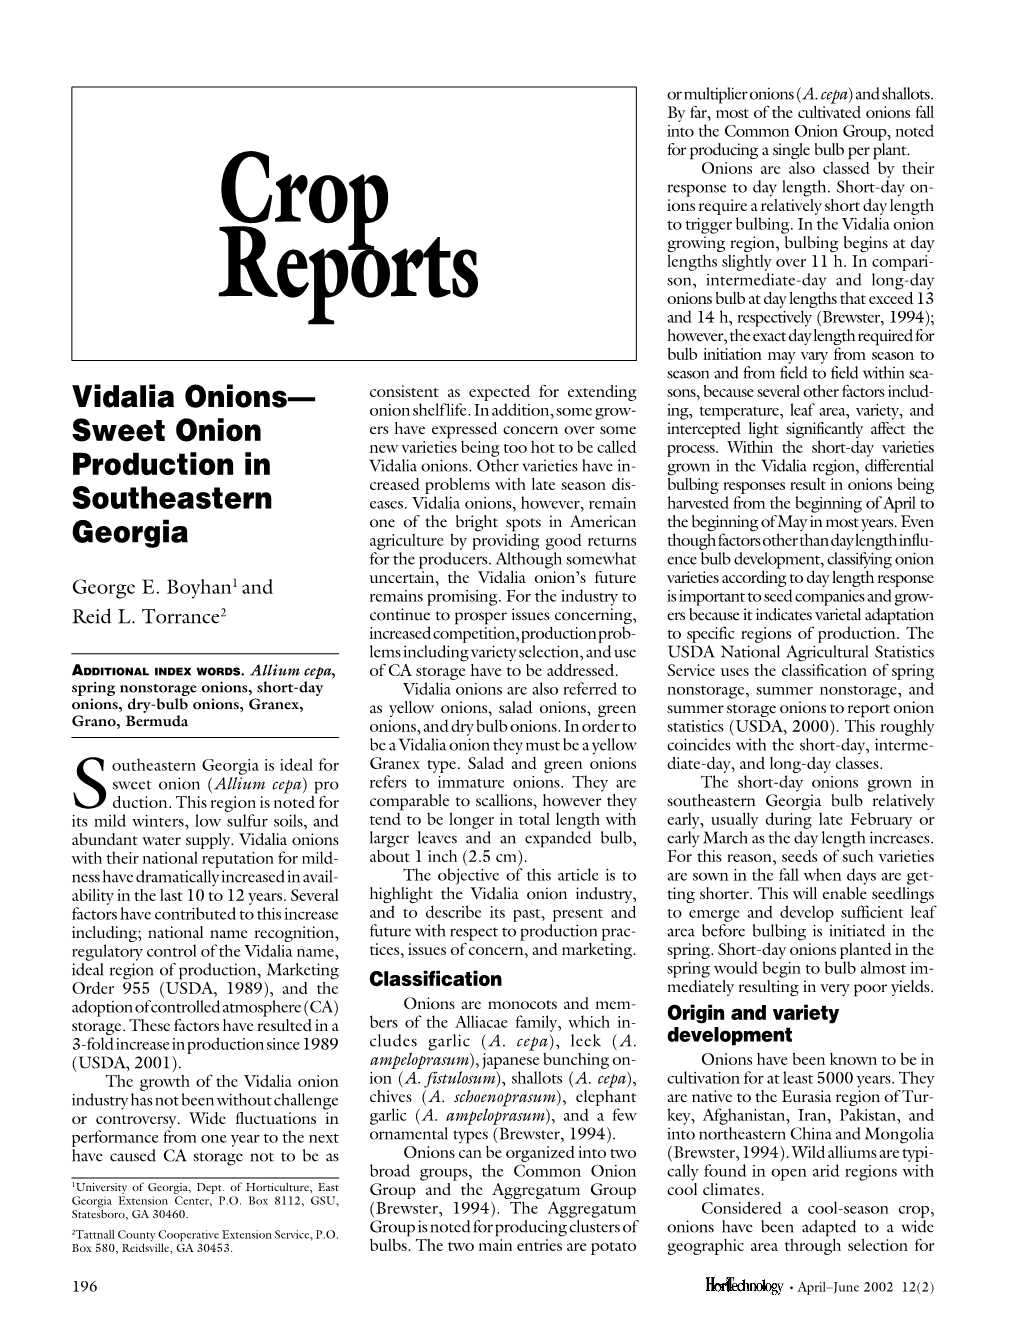 Crop Reports